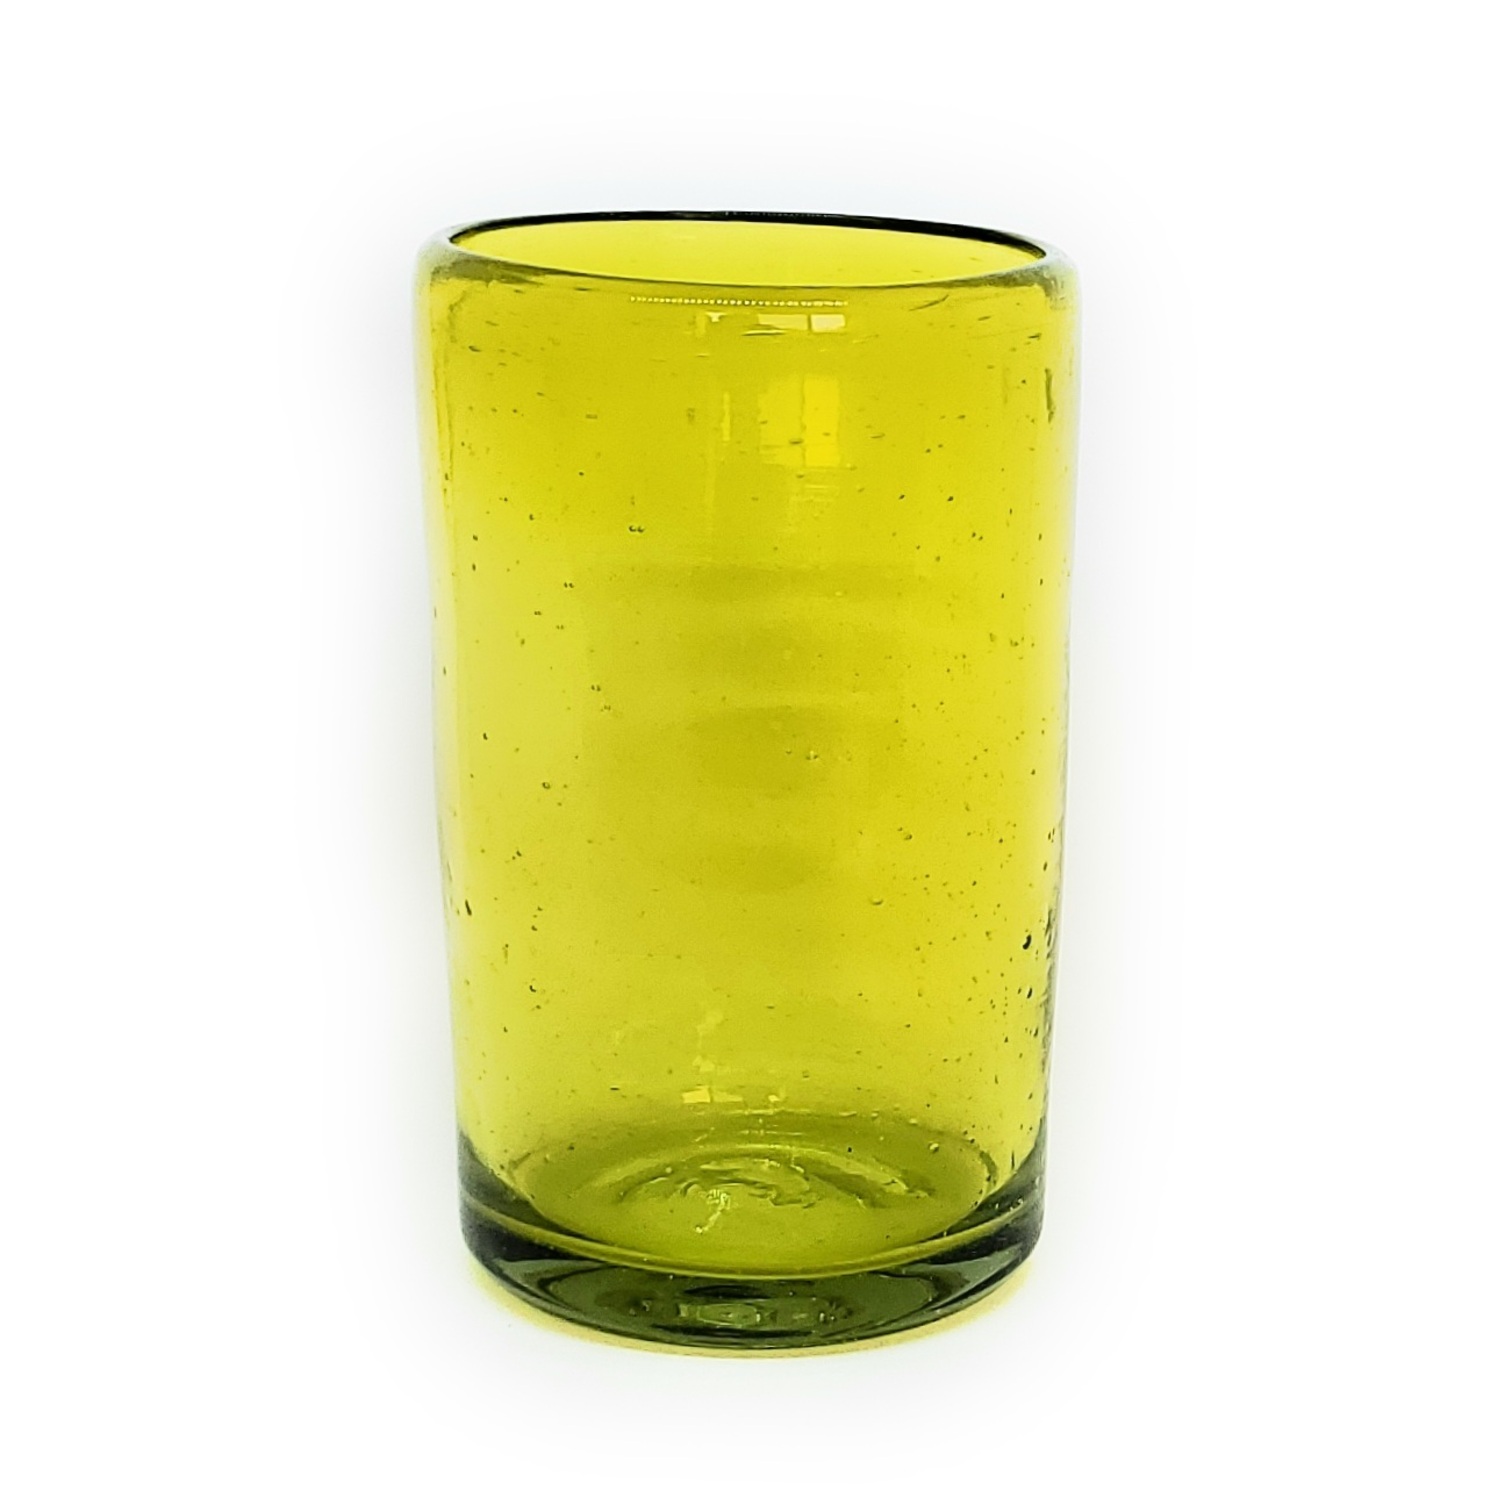  / Solid Yellow 14 oz Drinking Glasses (set of 6)